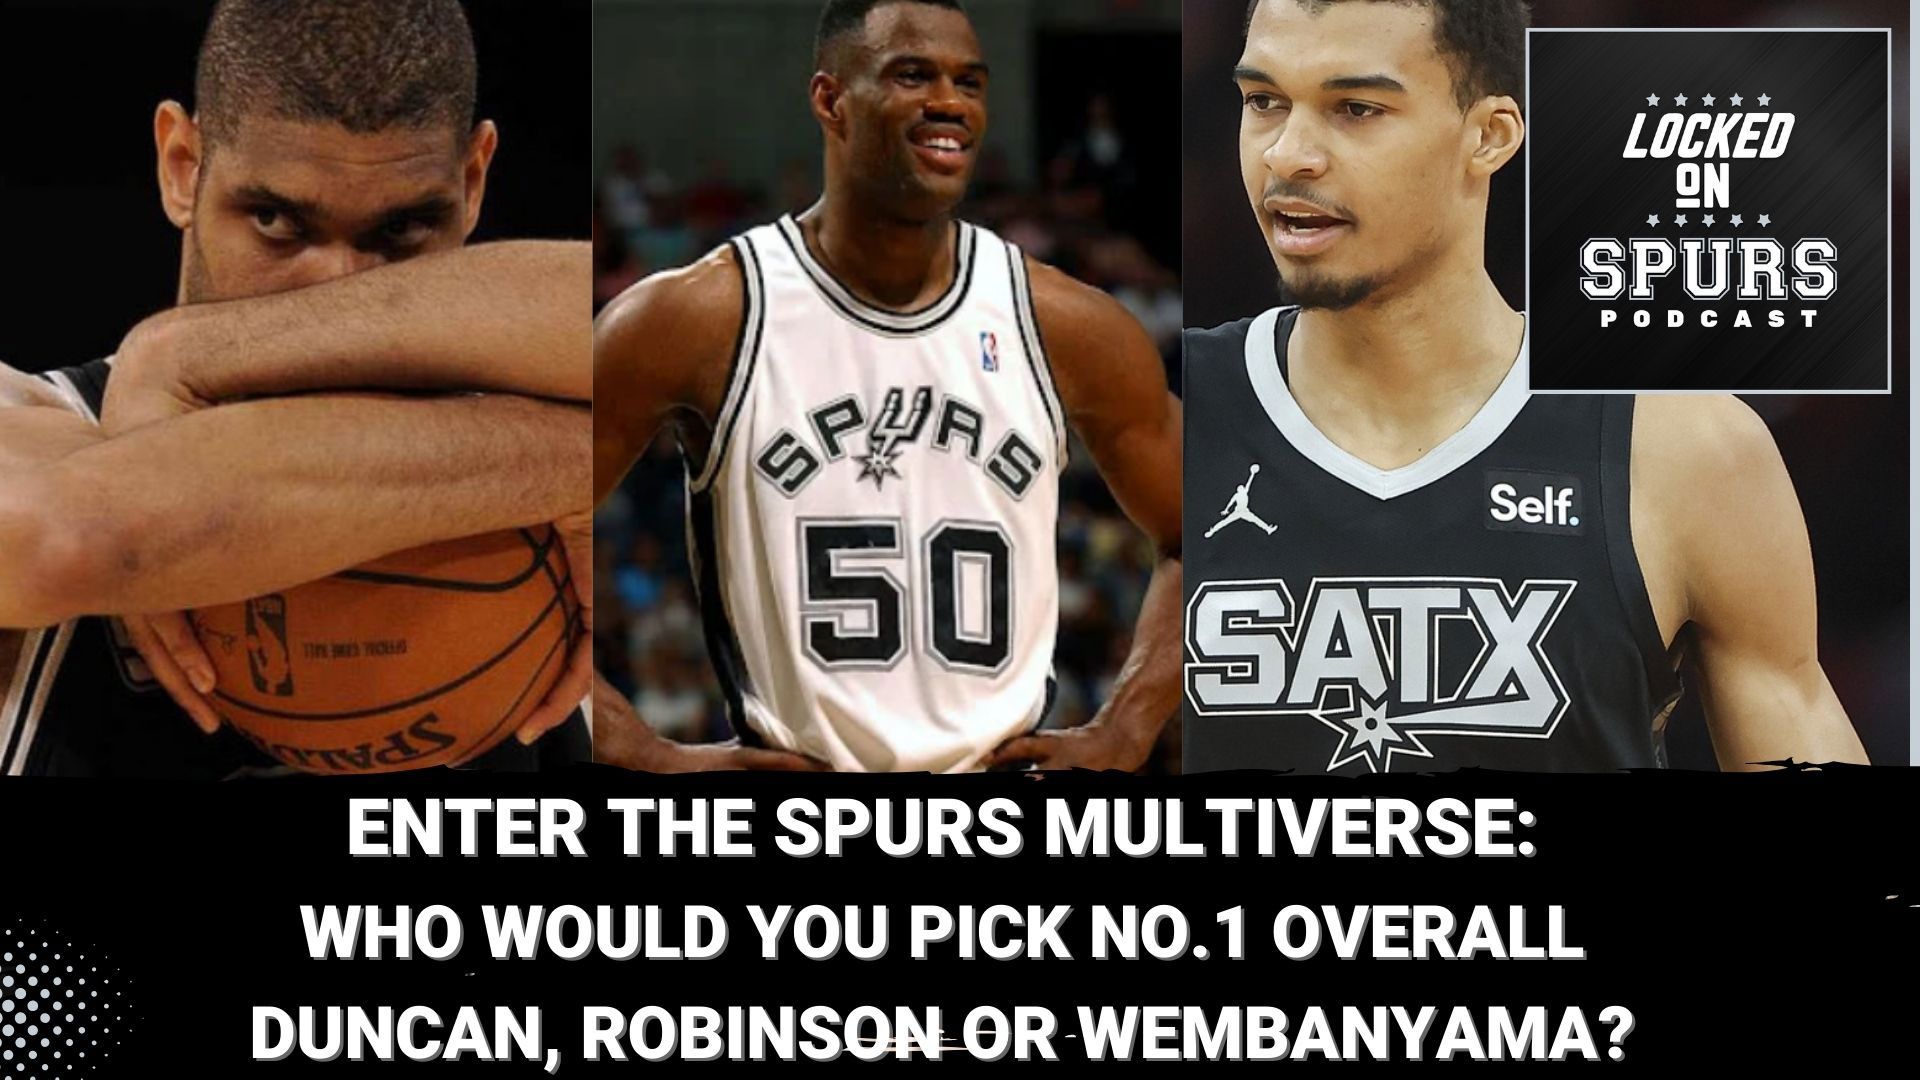 Enter an alternate Spurs timeline where the top three NBA prospects are Duncan, Robinson, and Wembanyama. Who would you pick No. 1?